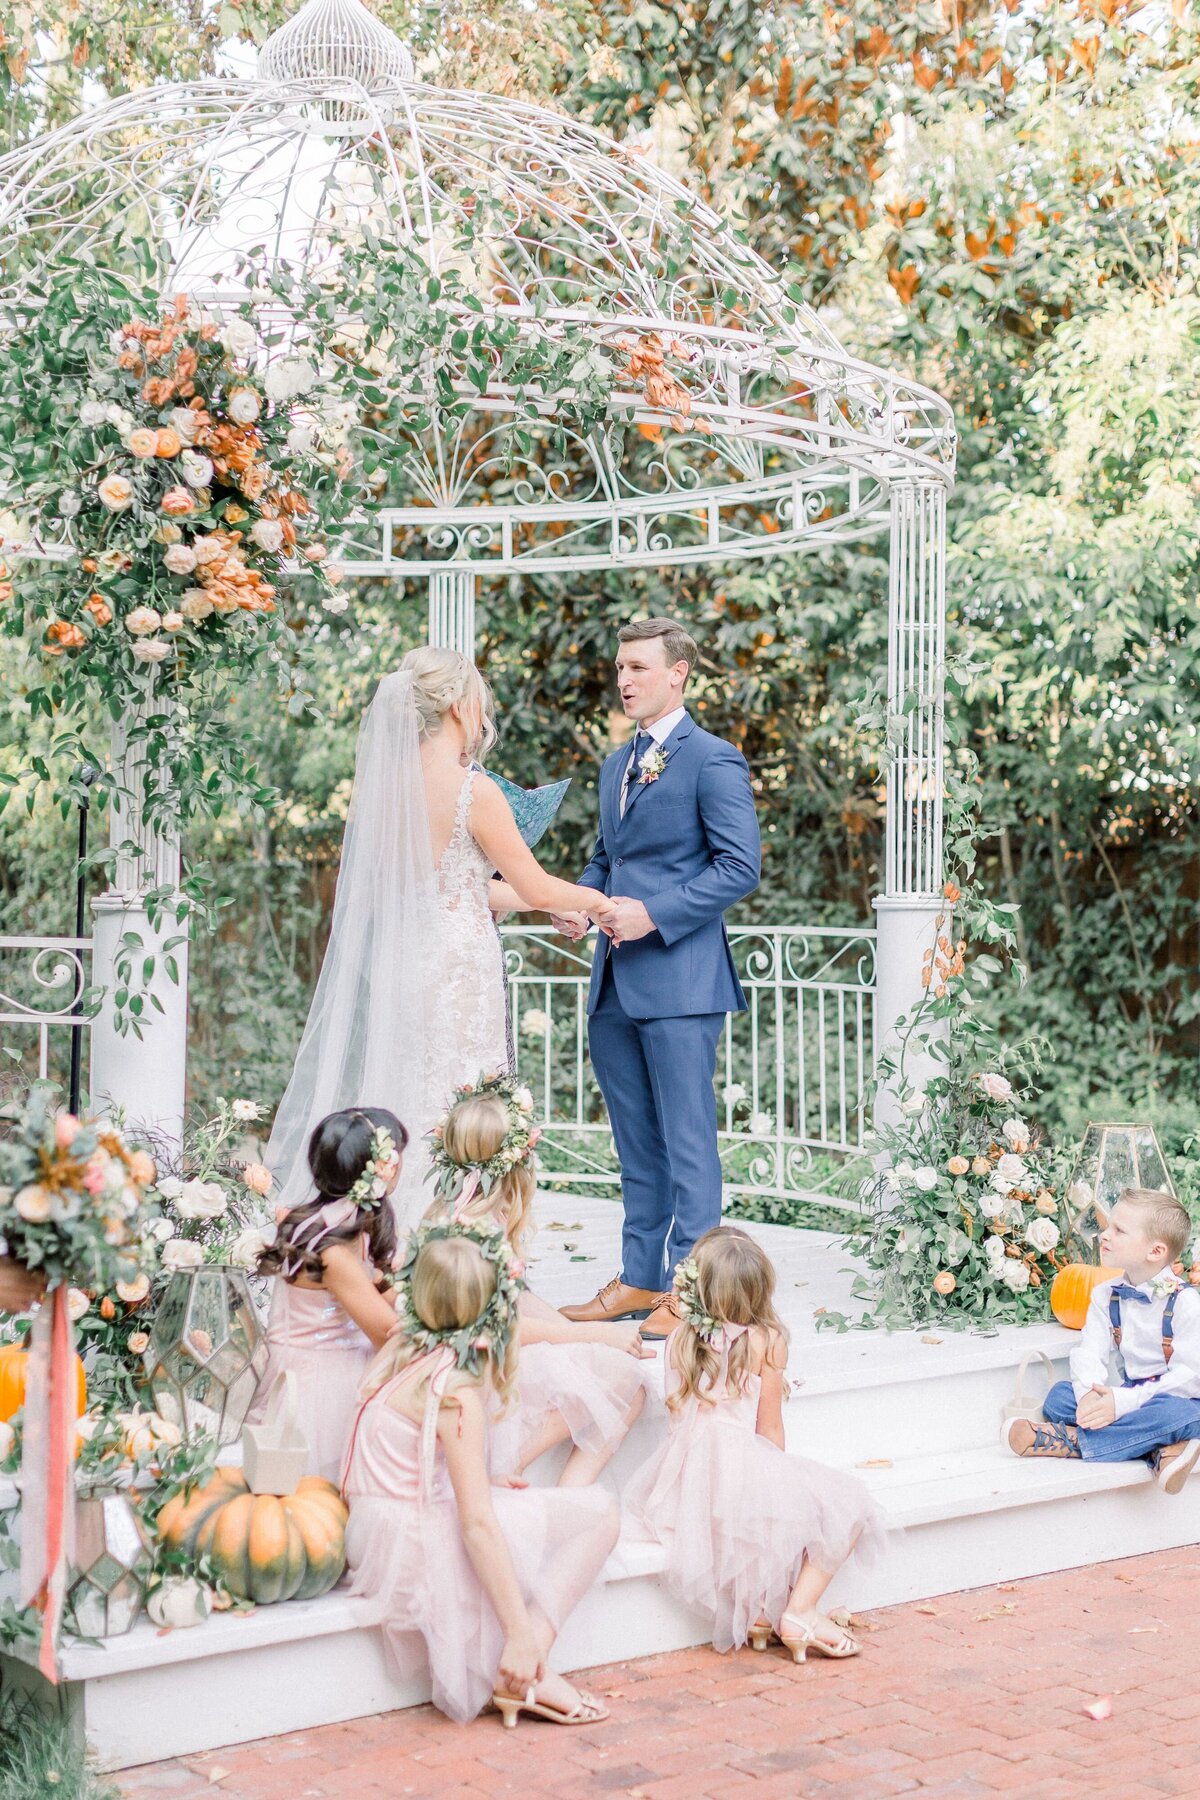 A pumpkin and fall colored floral wedding arbor.